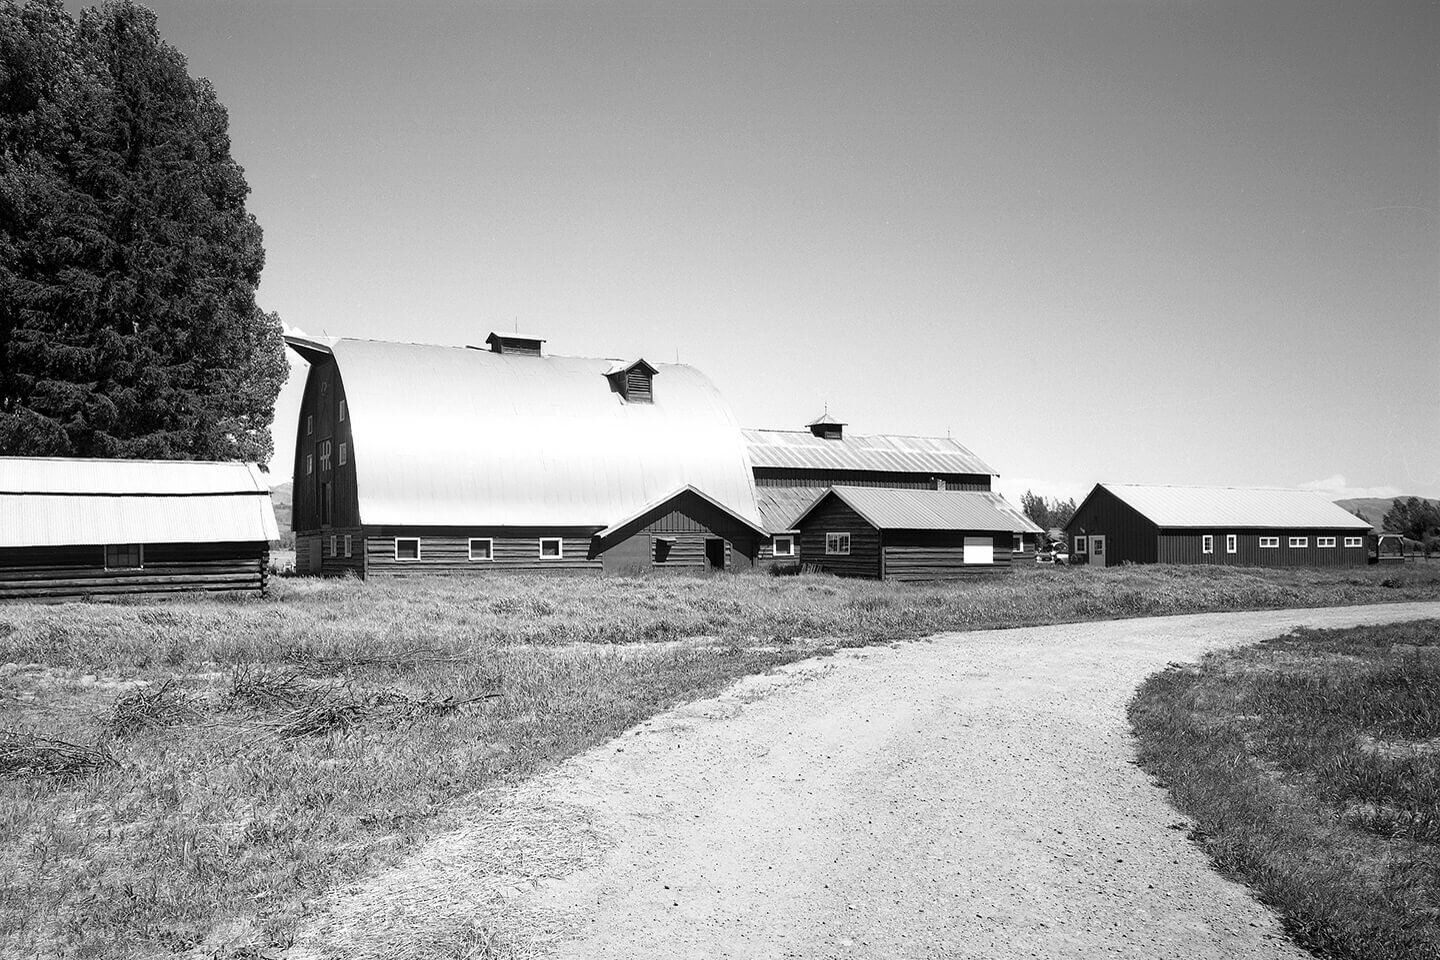 Large barn with arched roof and other structures